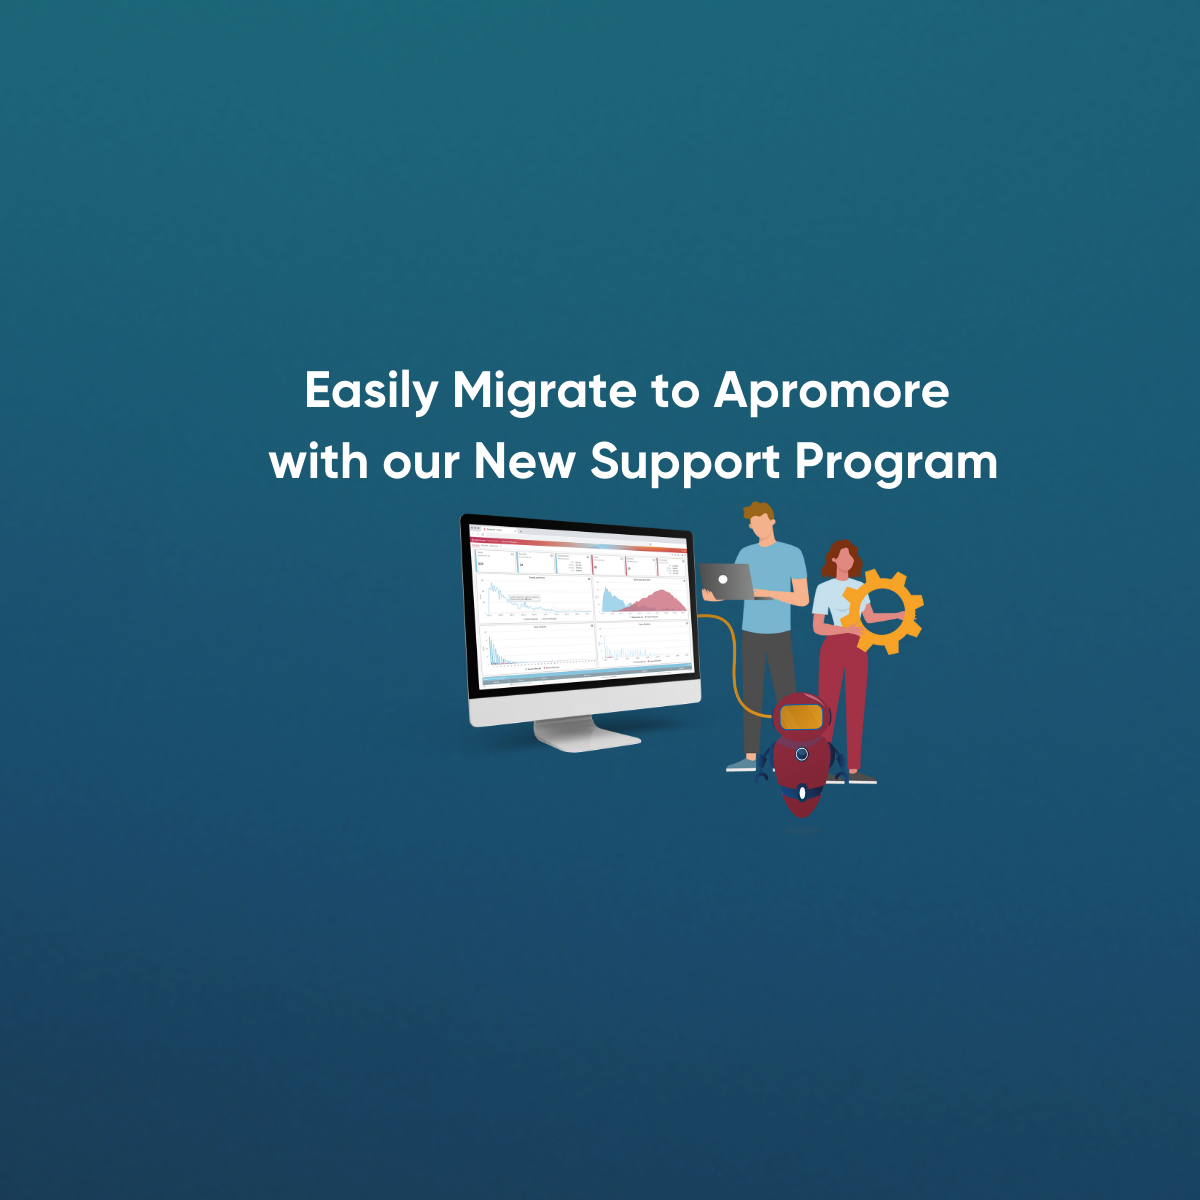 Easily Migrate to Apromore with our New Support Program